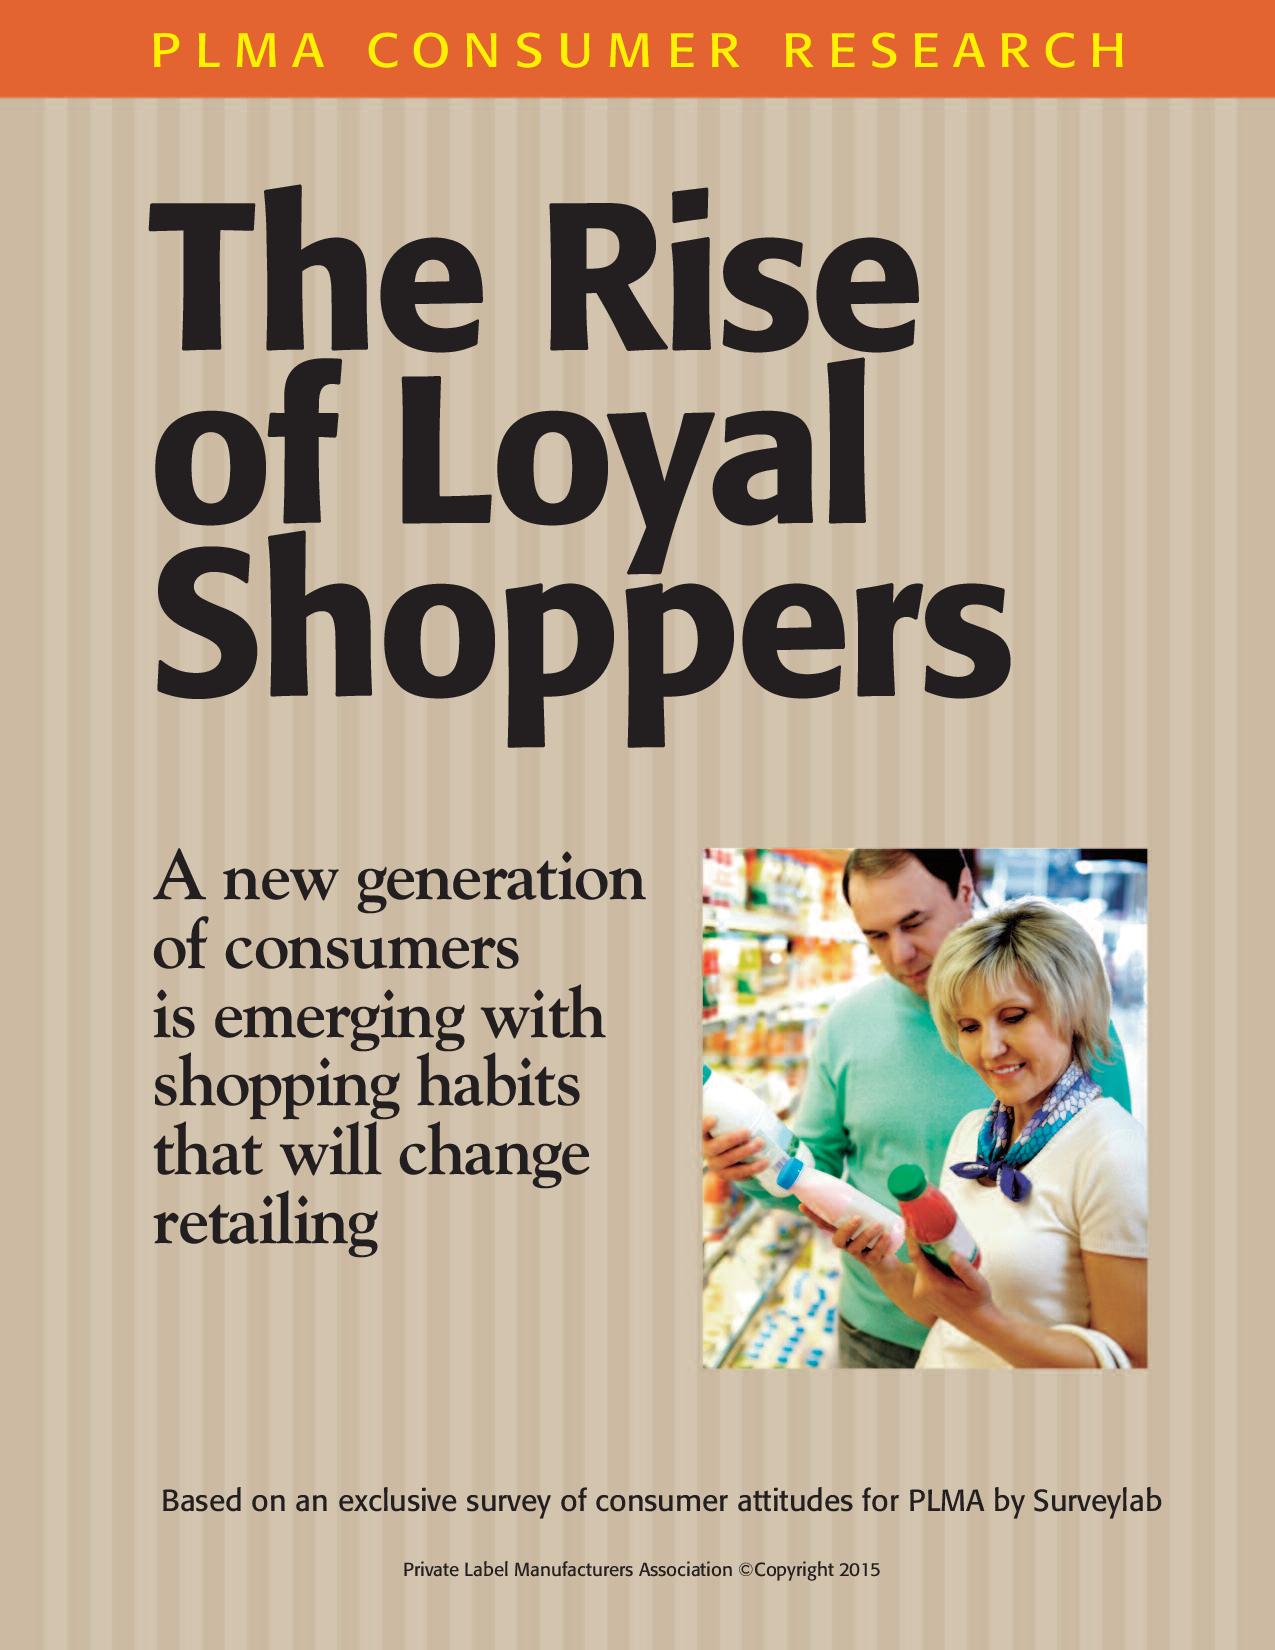 The Rise of Loyal Shoppers